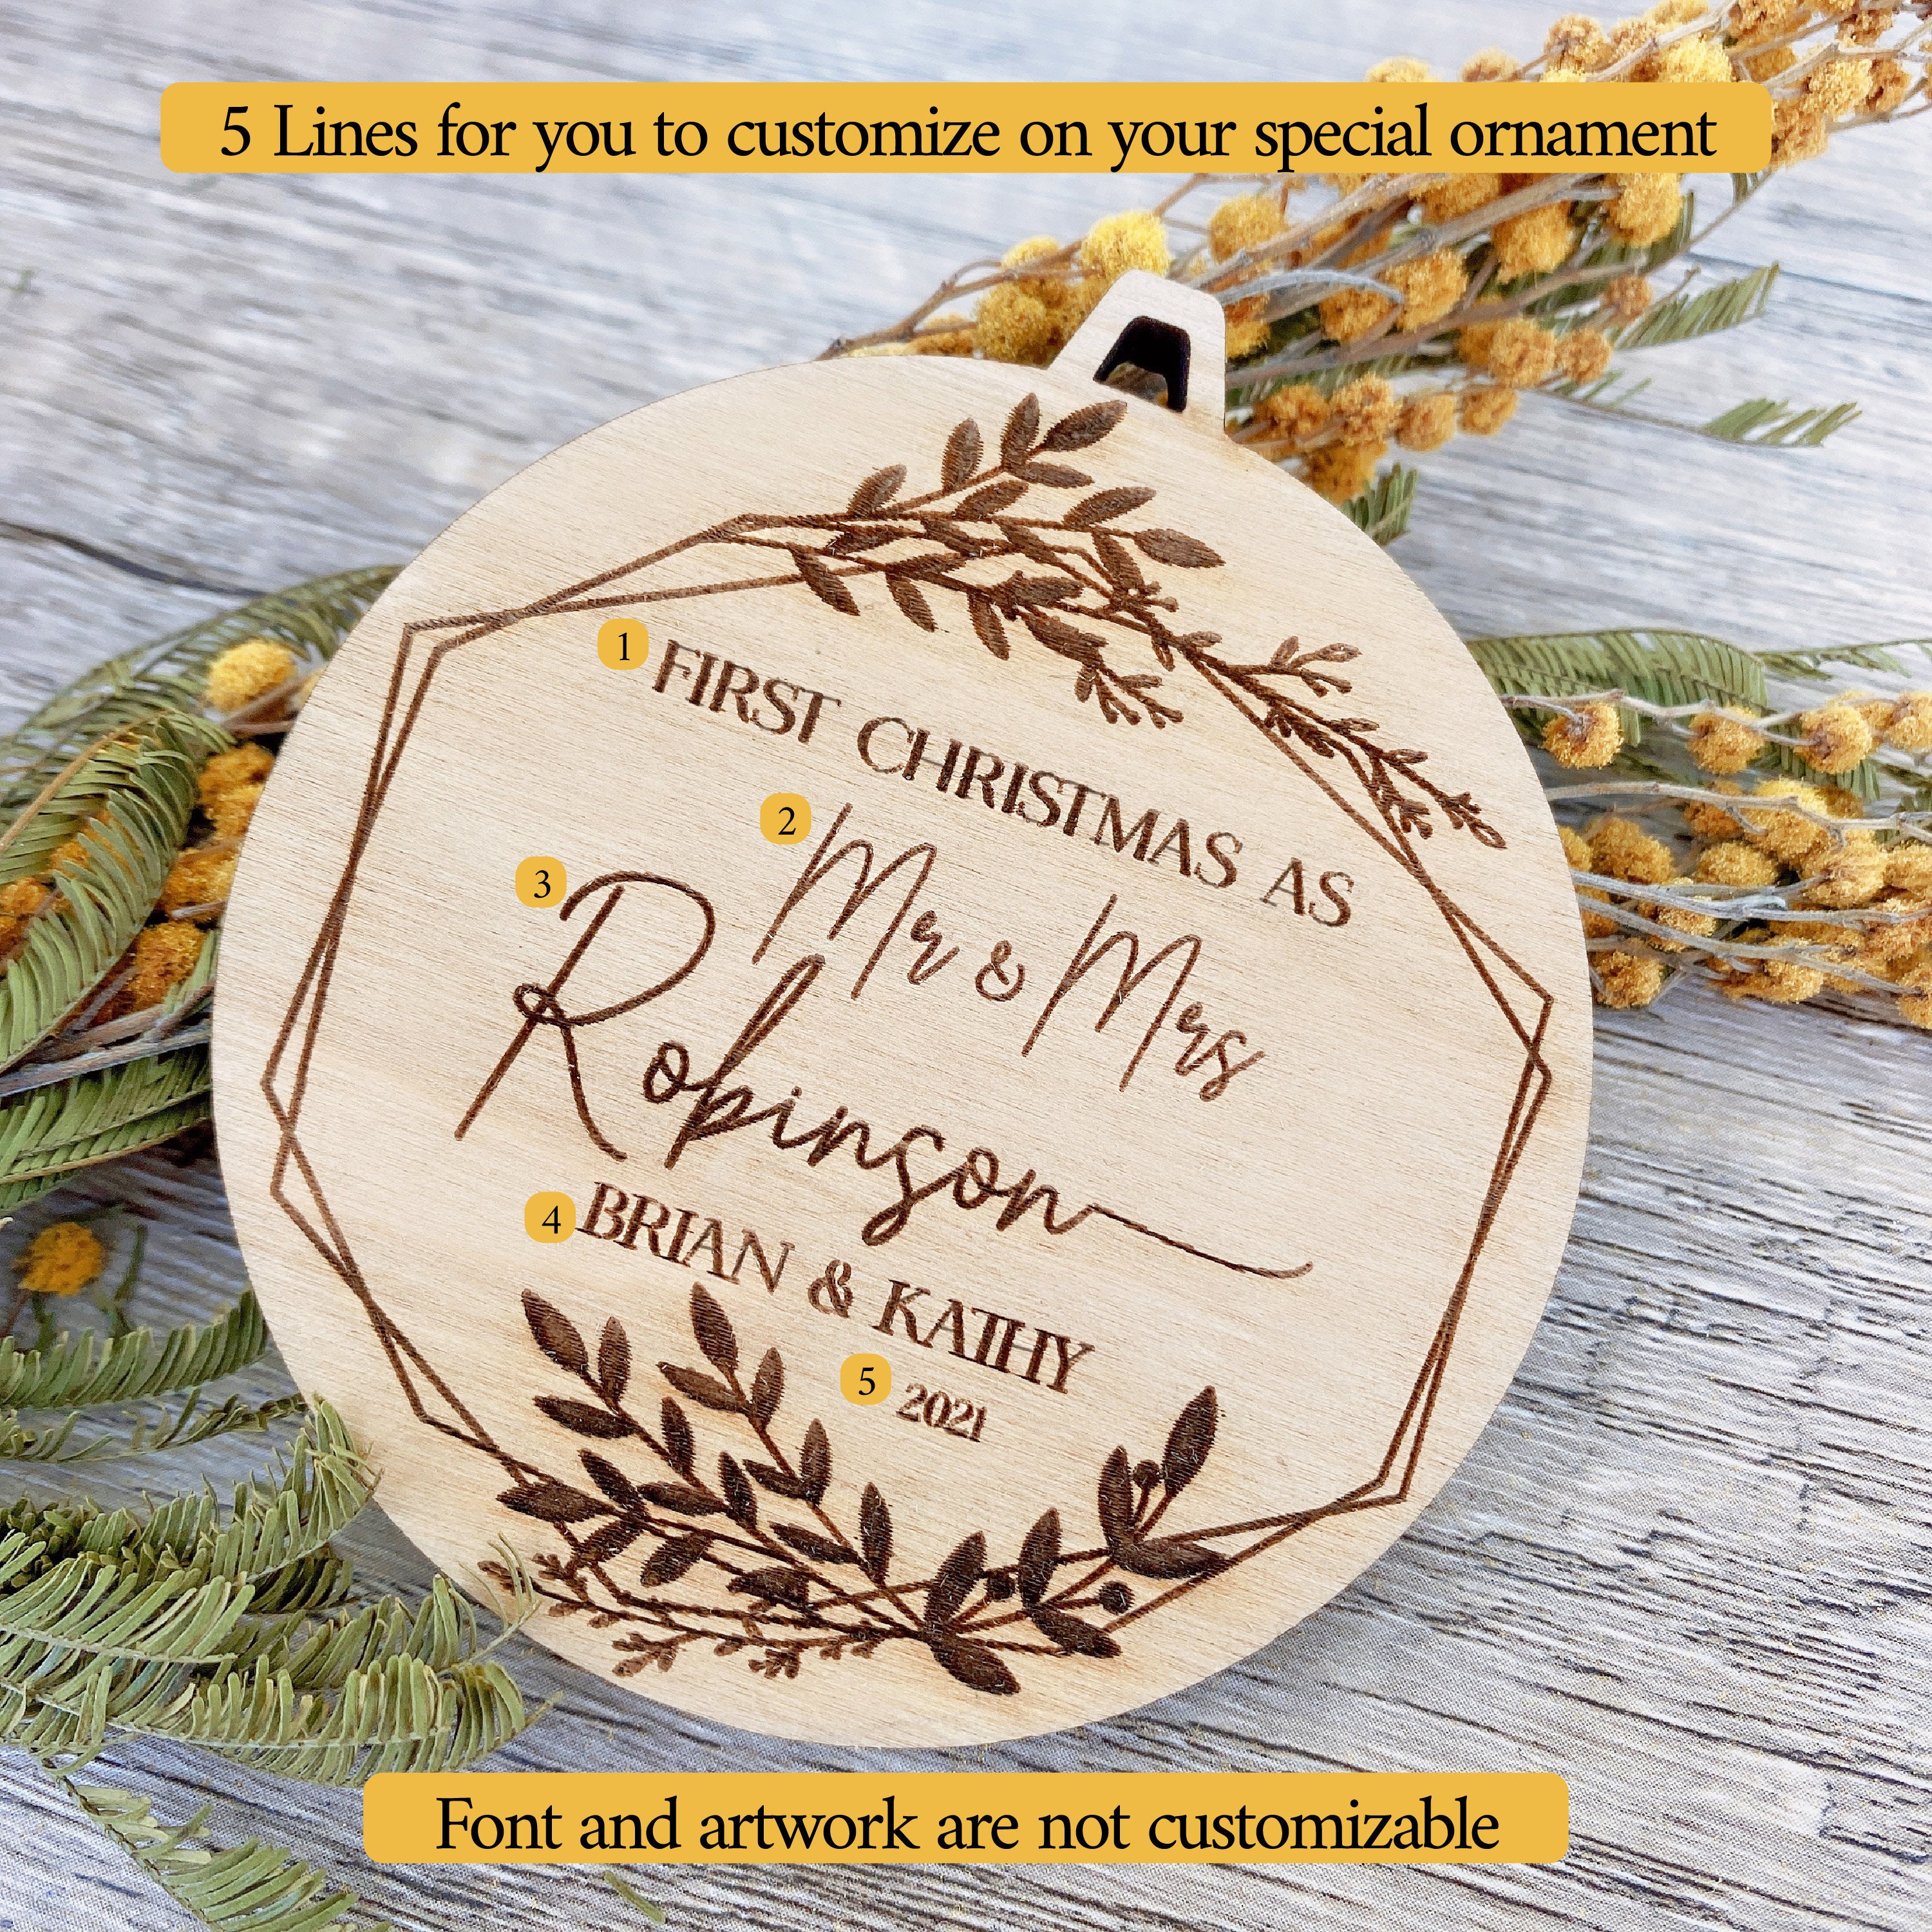 Couple Gift Wedding Gift Married Ornament Wedding Date Ornament